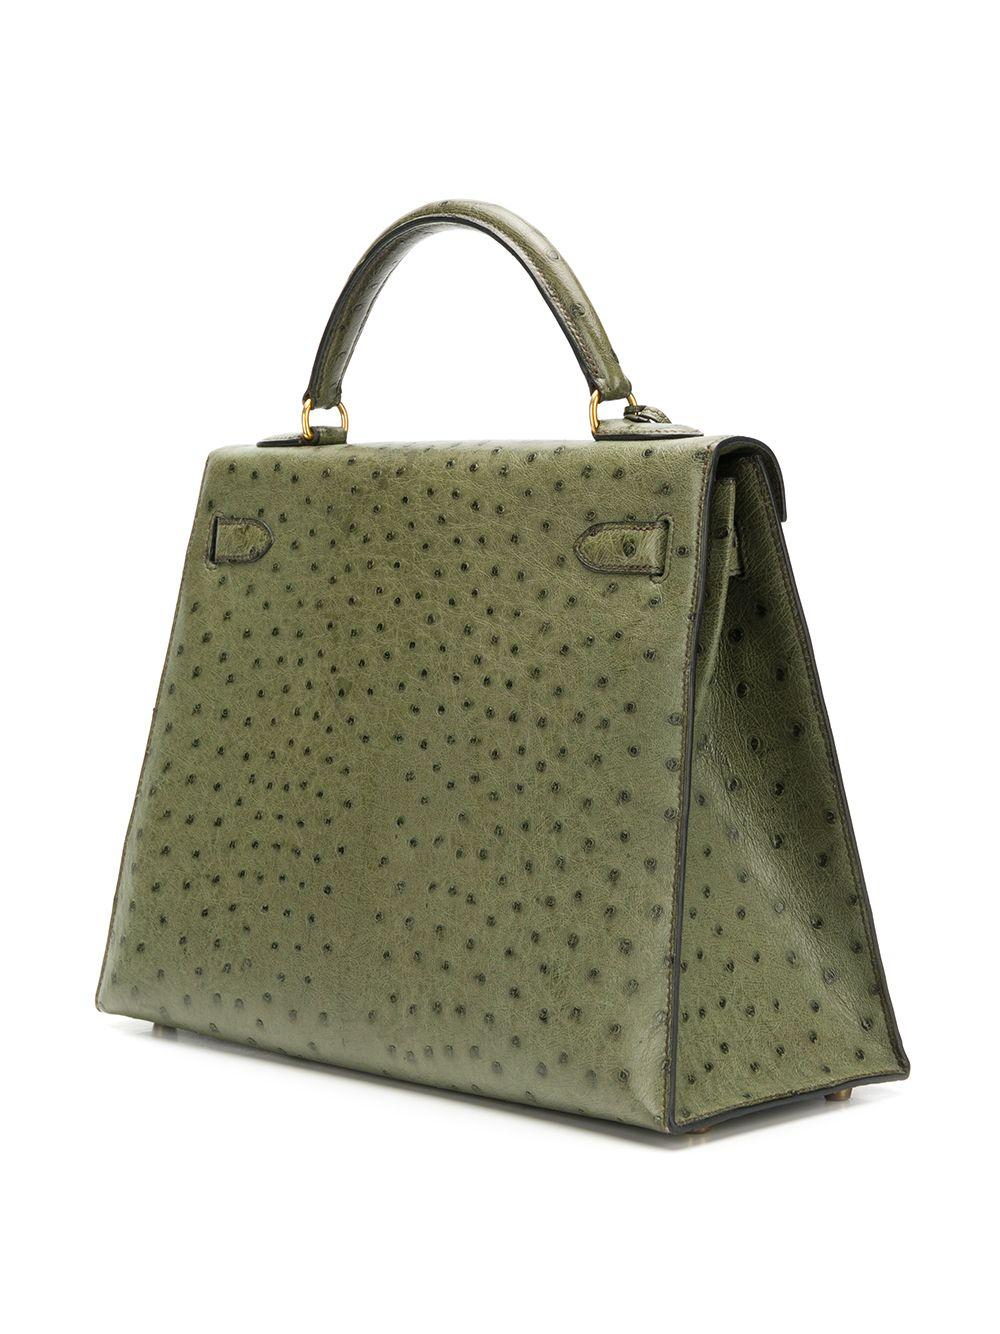 This 32cm Hermès Kelly handbag is crafted in a beautiful and earthy-toned Vert Olive Ostrich leather, and features gold-plated palladium hardware, a top handle and detachable strap. Its interior features a matching goatskin interior with one zipped